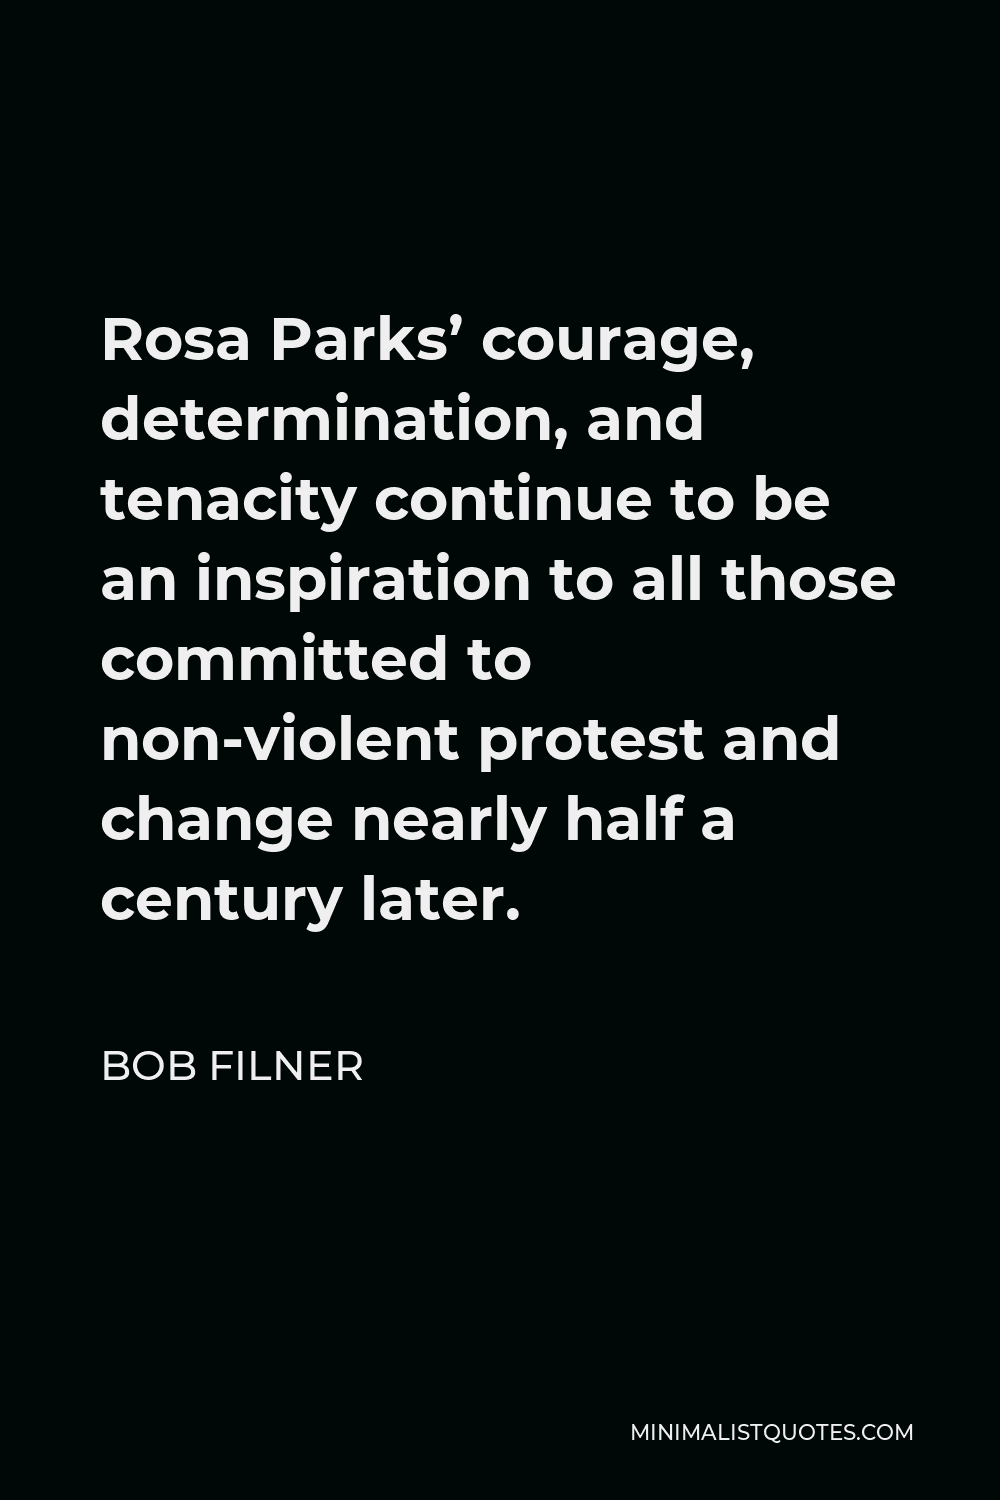 Bob Filner Quote - Rosa Parks’ courage, determination, and tenacity continue to be an inspiration to all those committed to non-violent protest and change nearly half a century later.